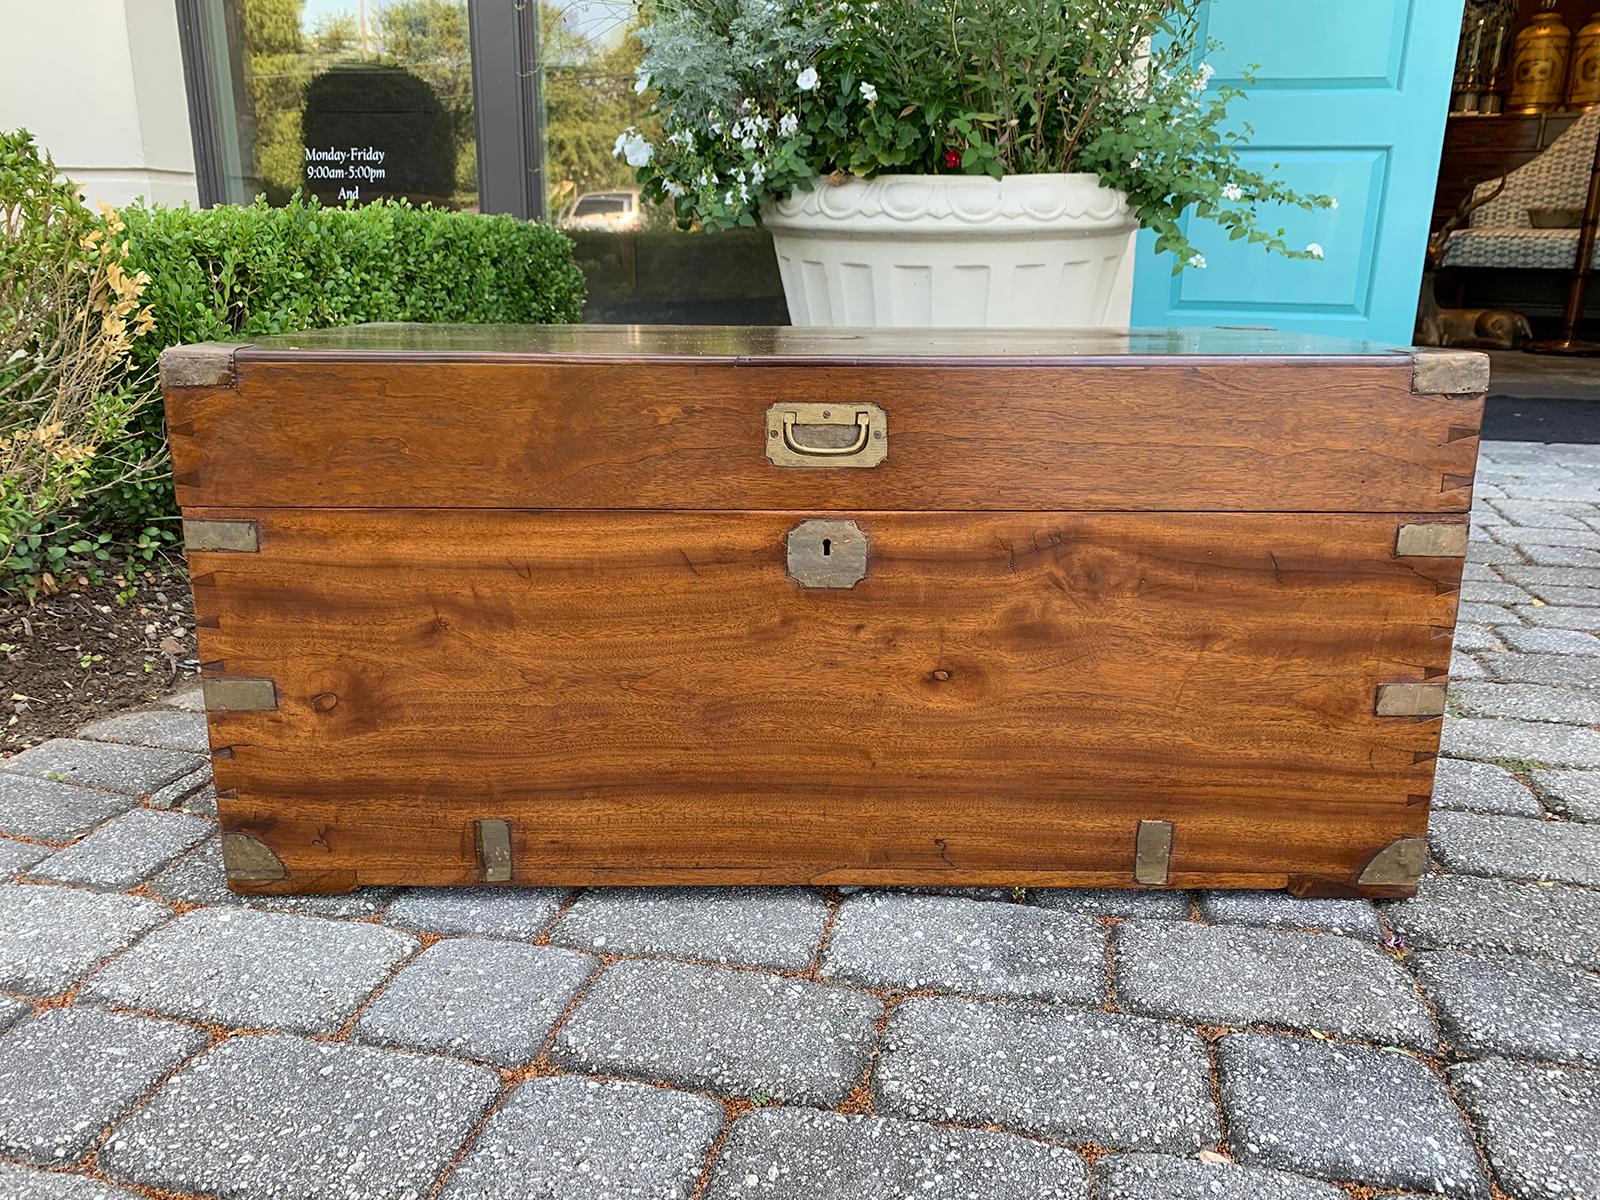 Sea captains campaign style camphor wood trunk, circa 1840
Brass accents.